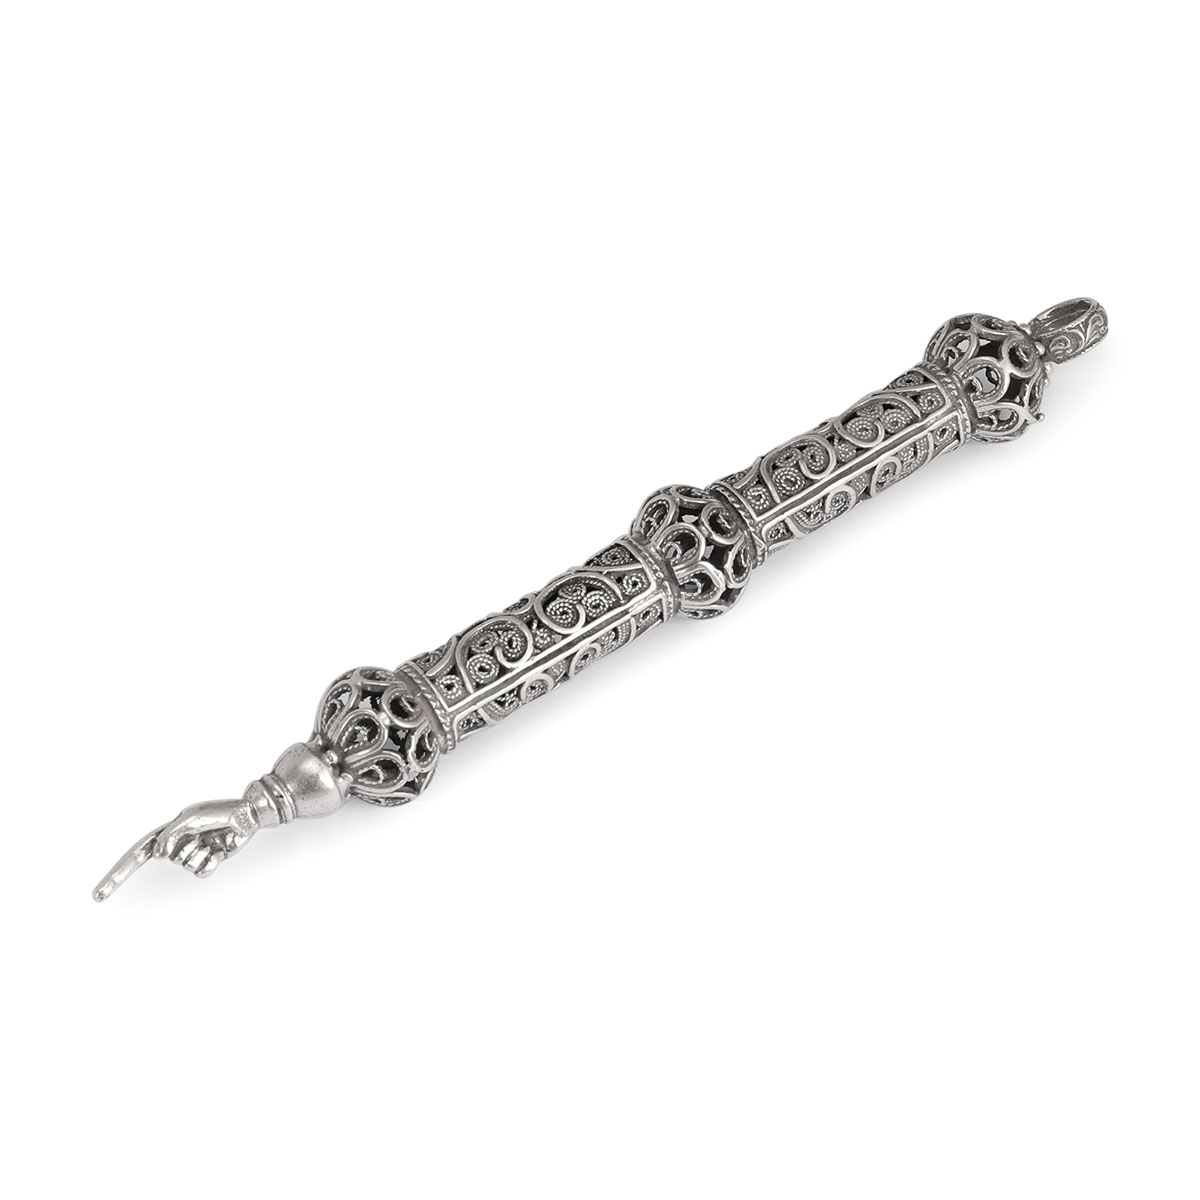 Traditional Yemenite Art Ornate Handcrafted Sterling Silver Yad (Torah Pointer) With Filigree Design - 1